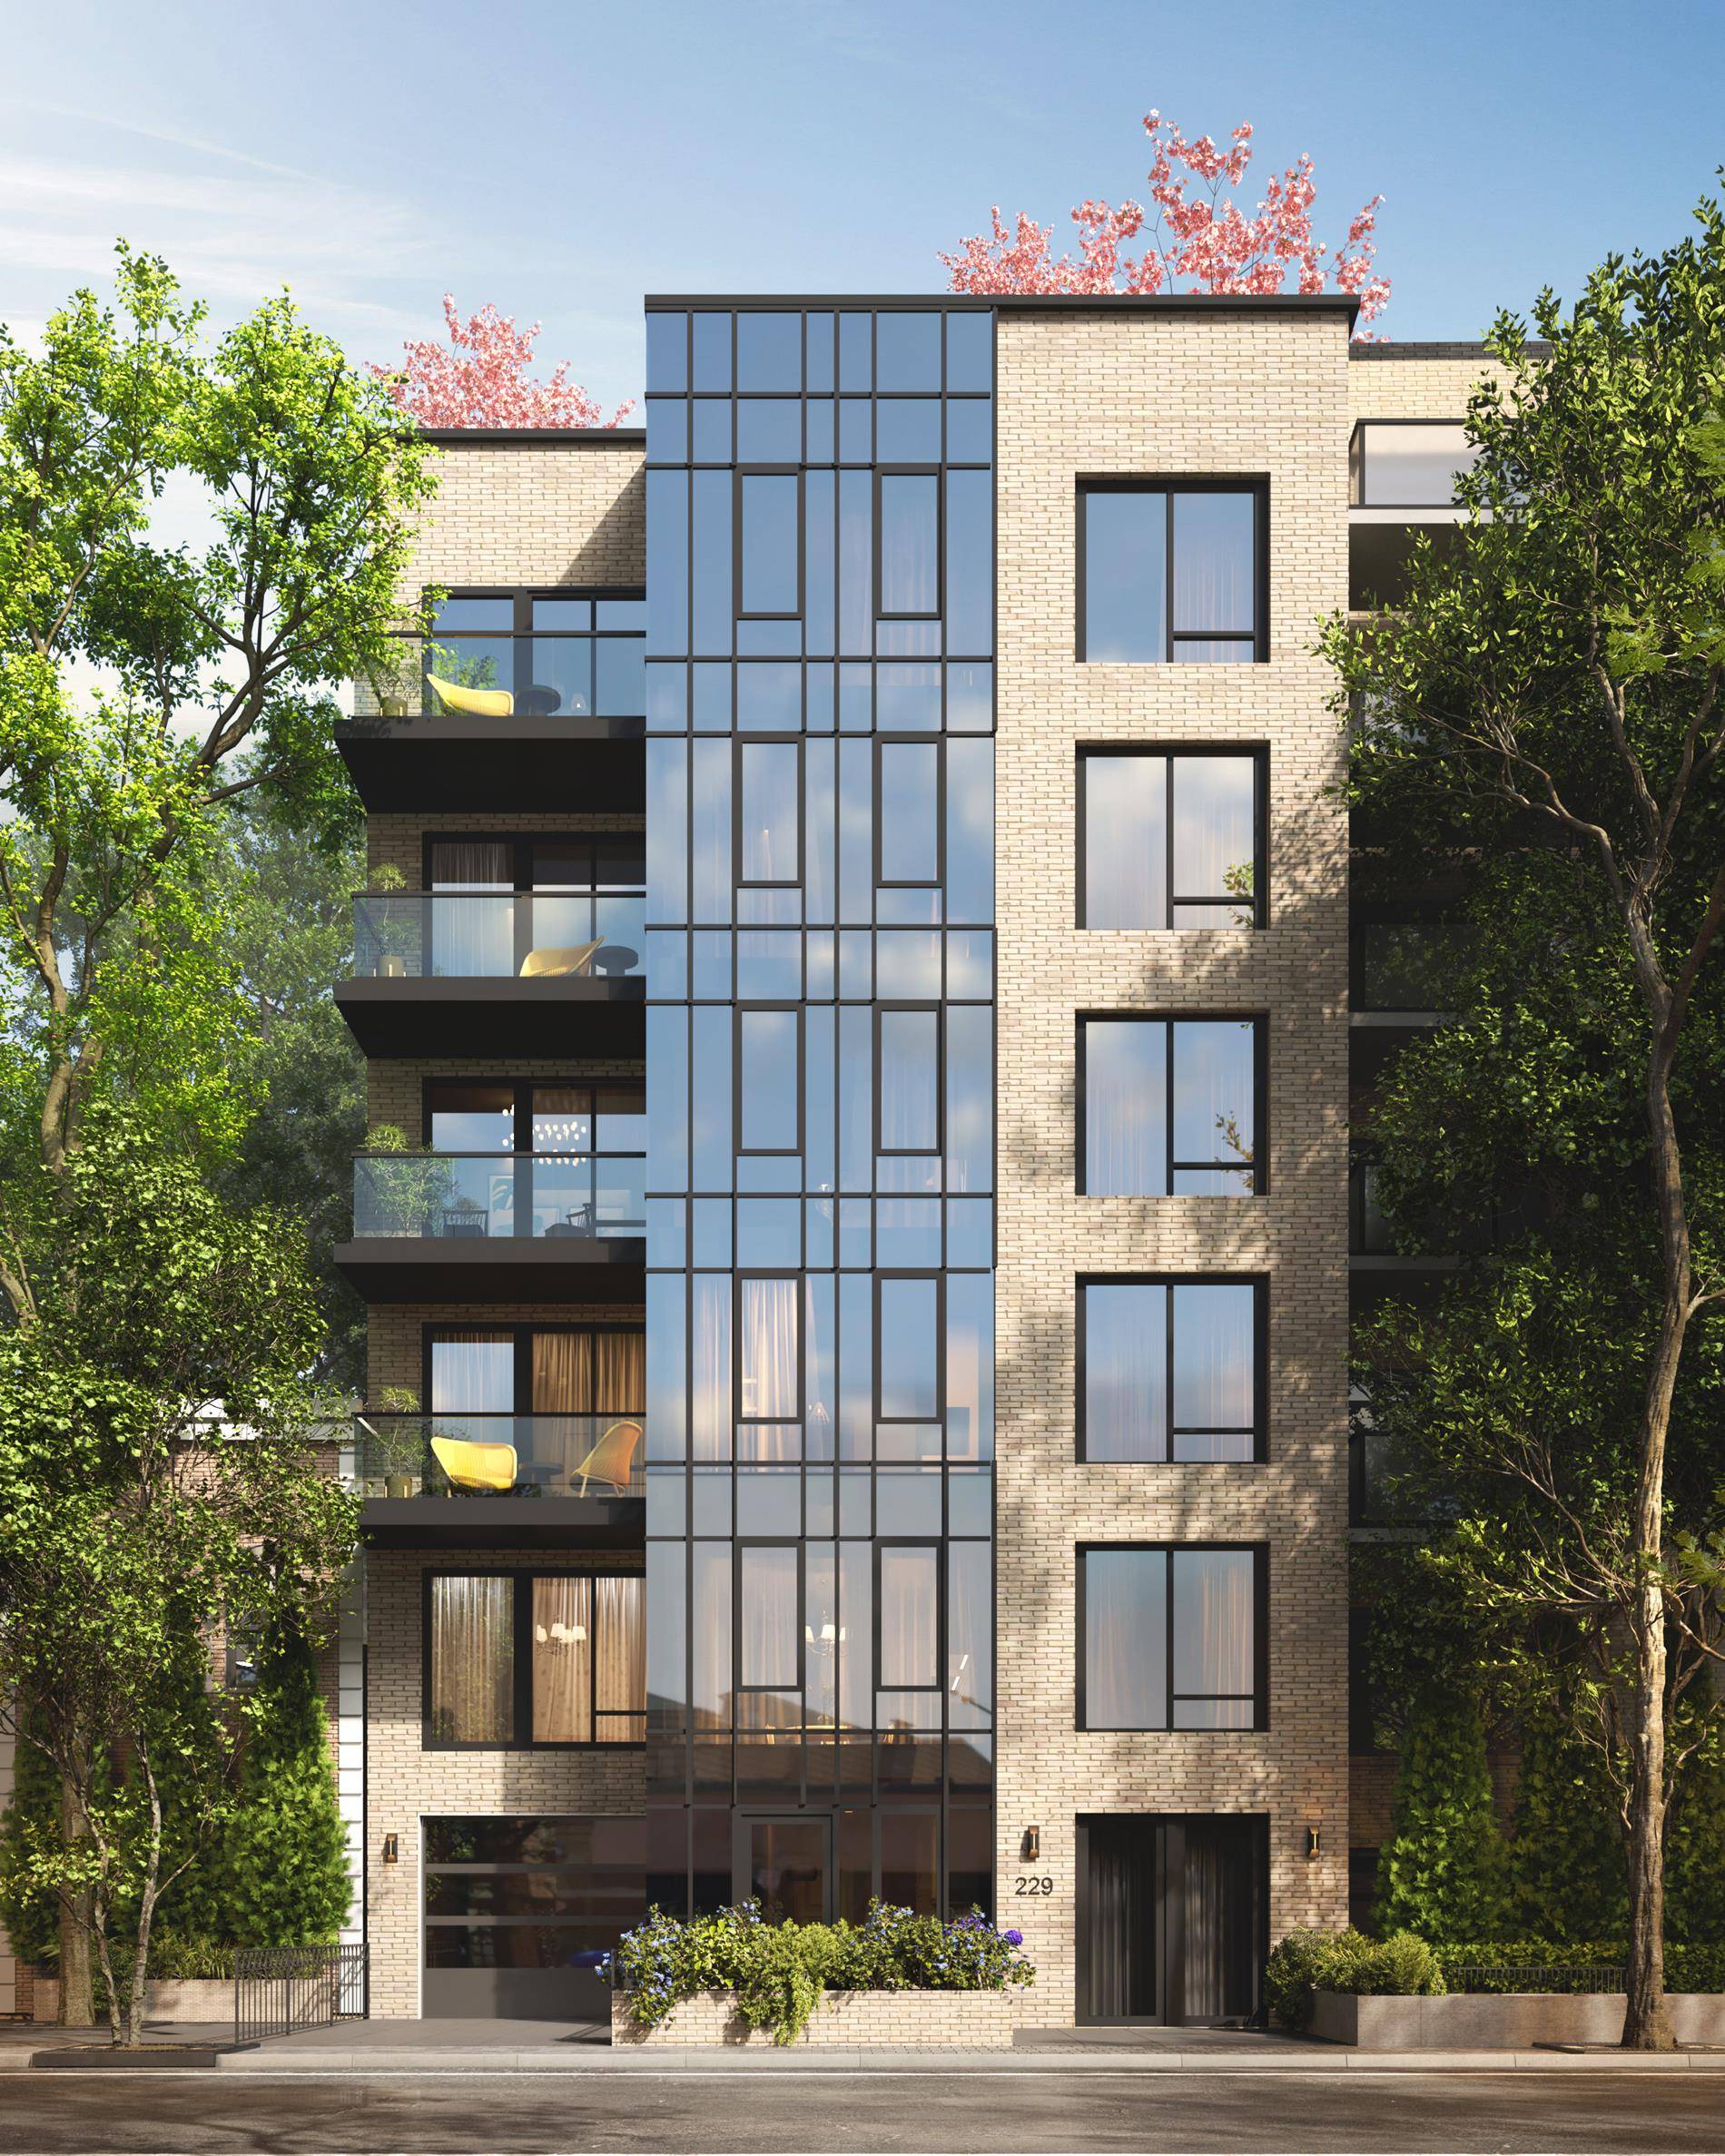 A luxurious condo with deeded parking and a private balcony, this brand new 2 bedroom, 2 bathroom home combines sleek and stylish design with the tranquil, tree lined street ambiance ...